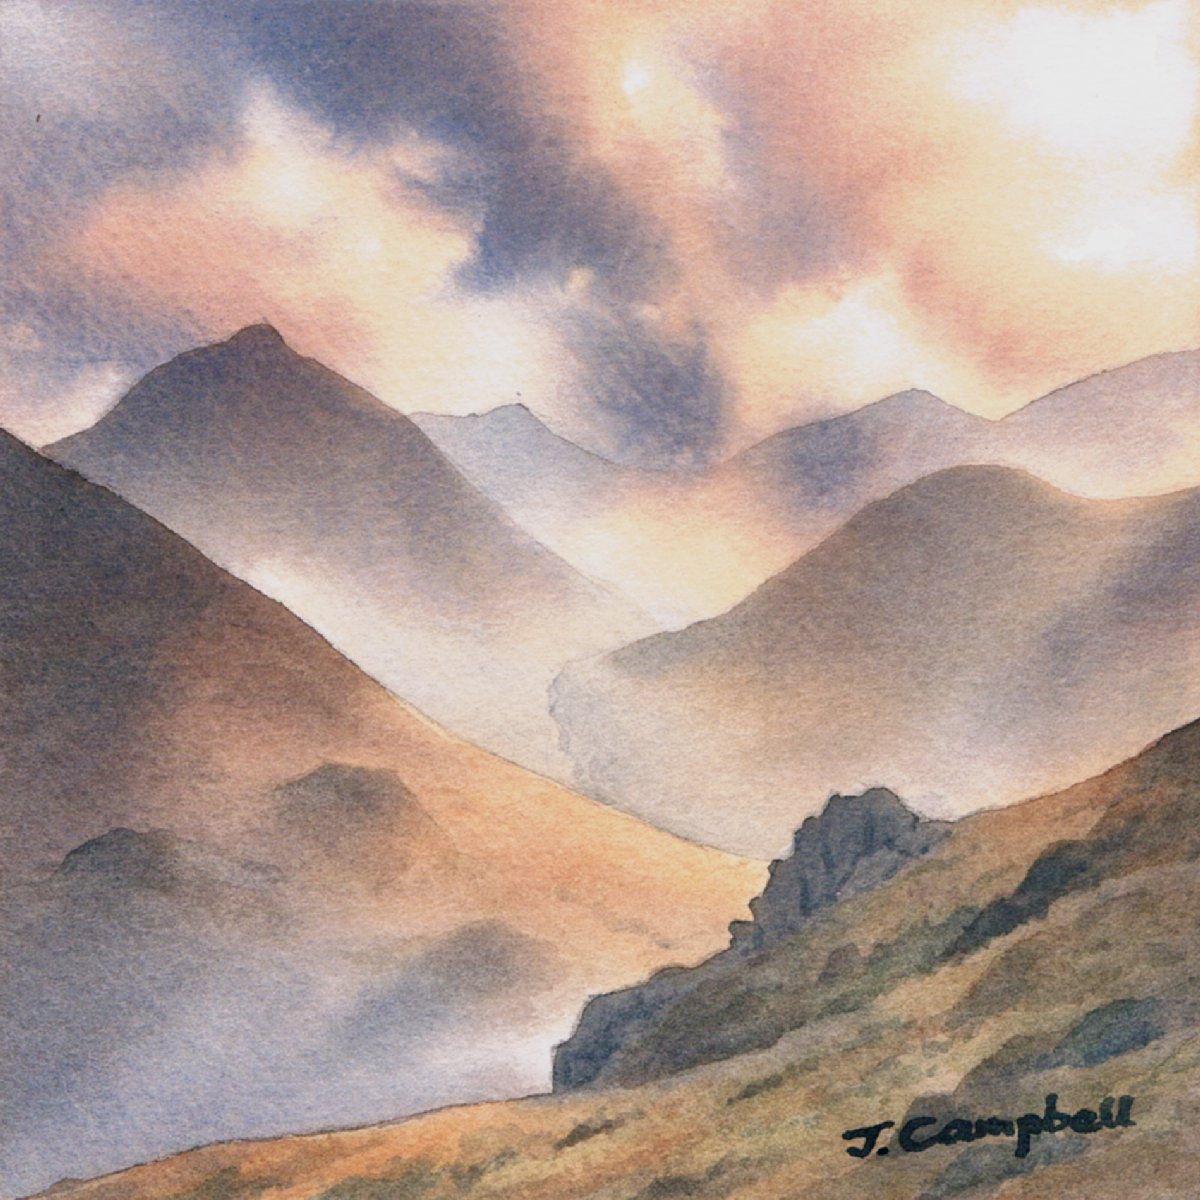 Catstycam from Sheffield Pike by John Campbell